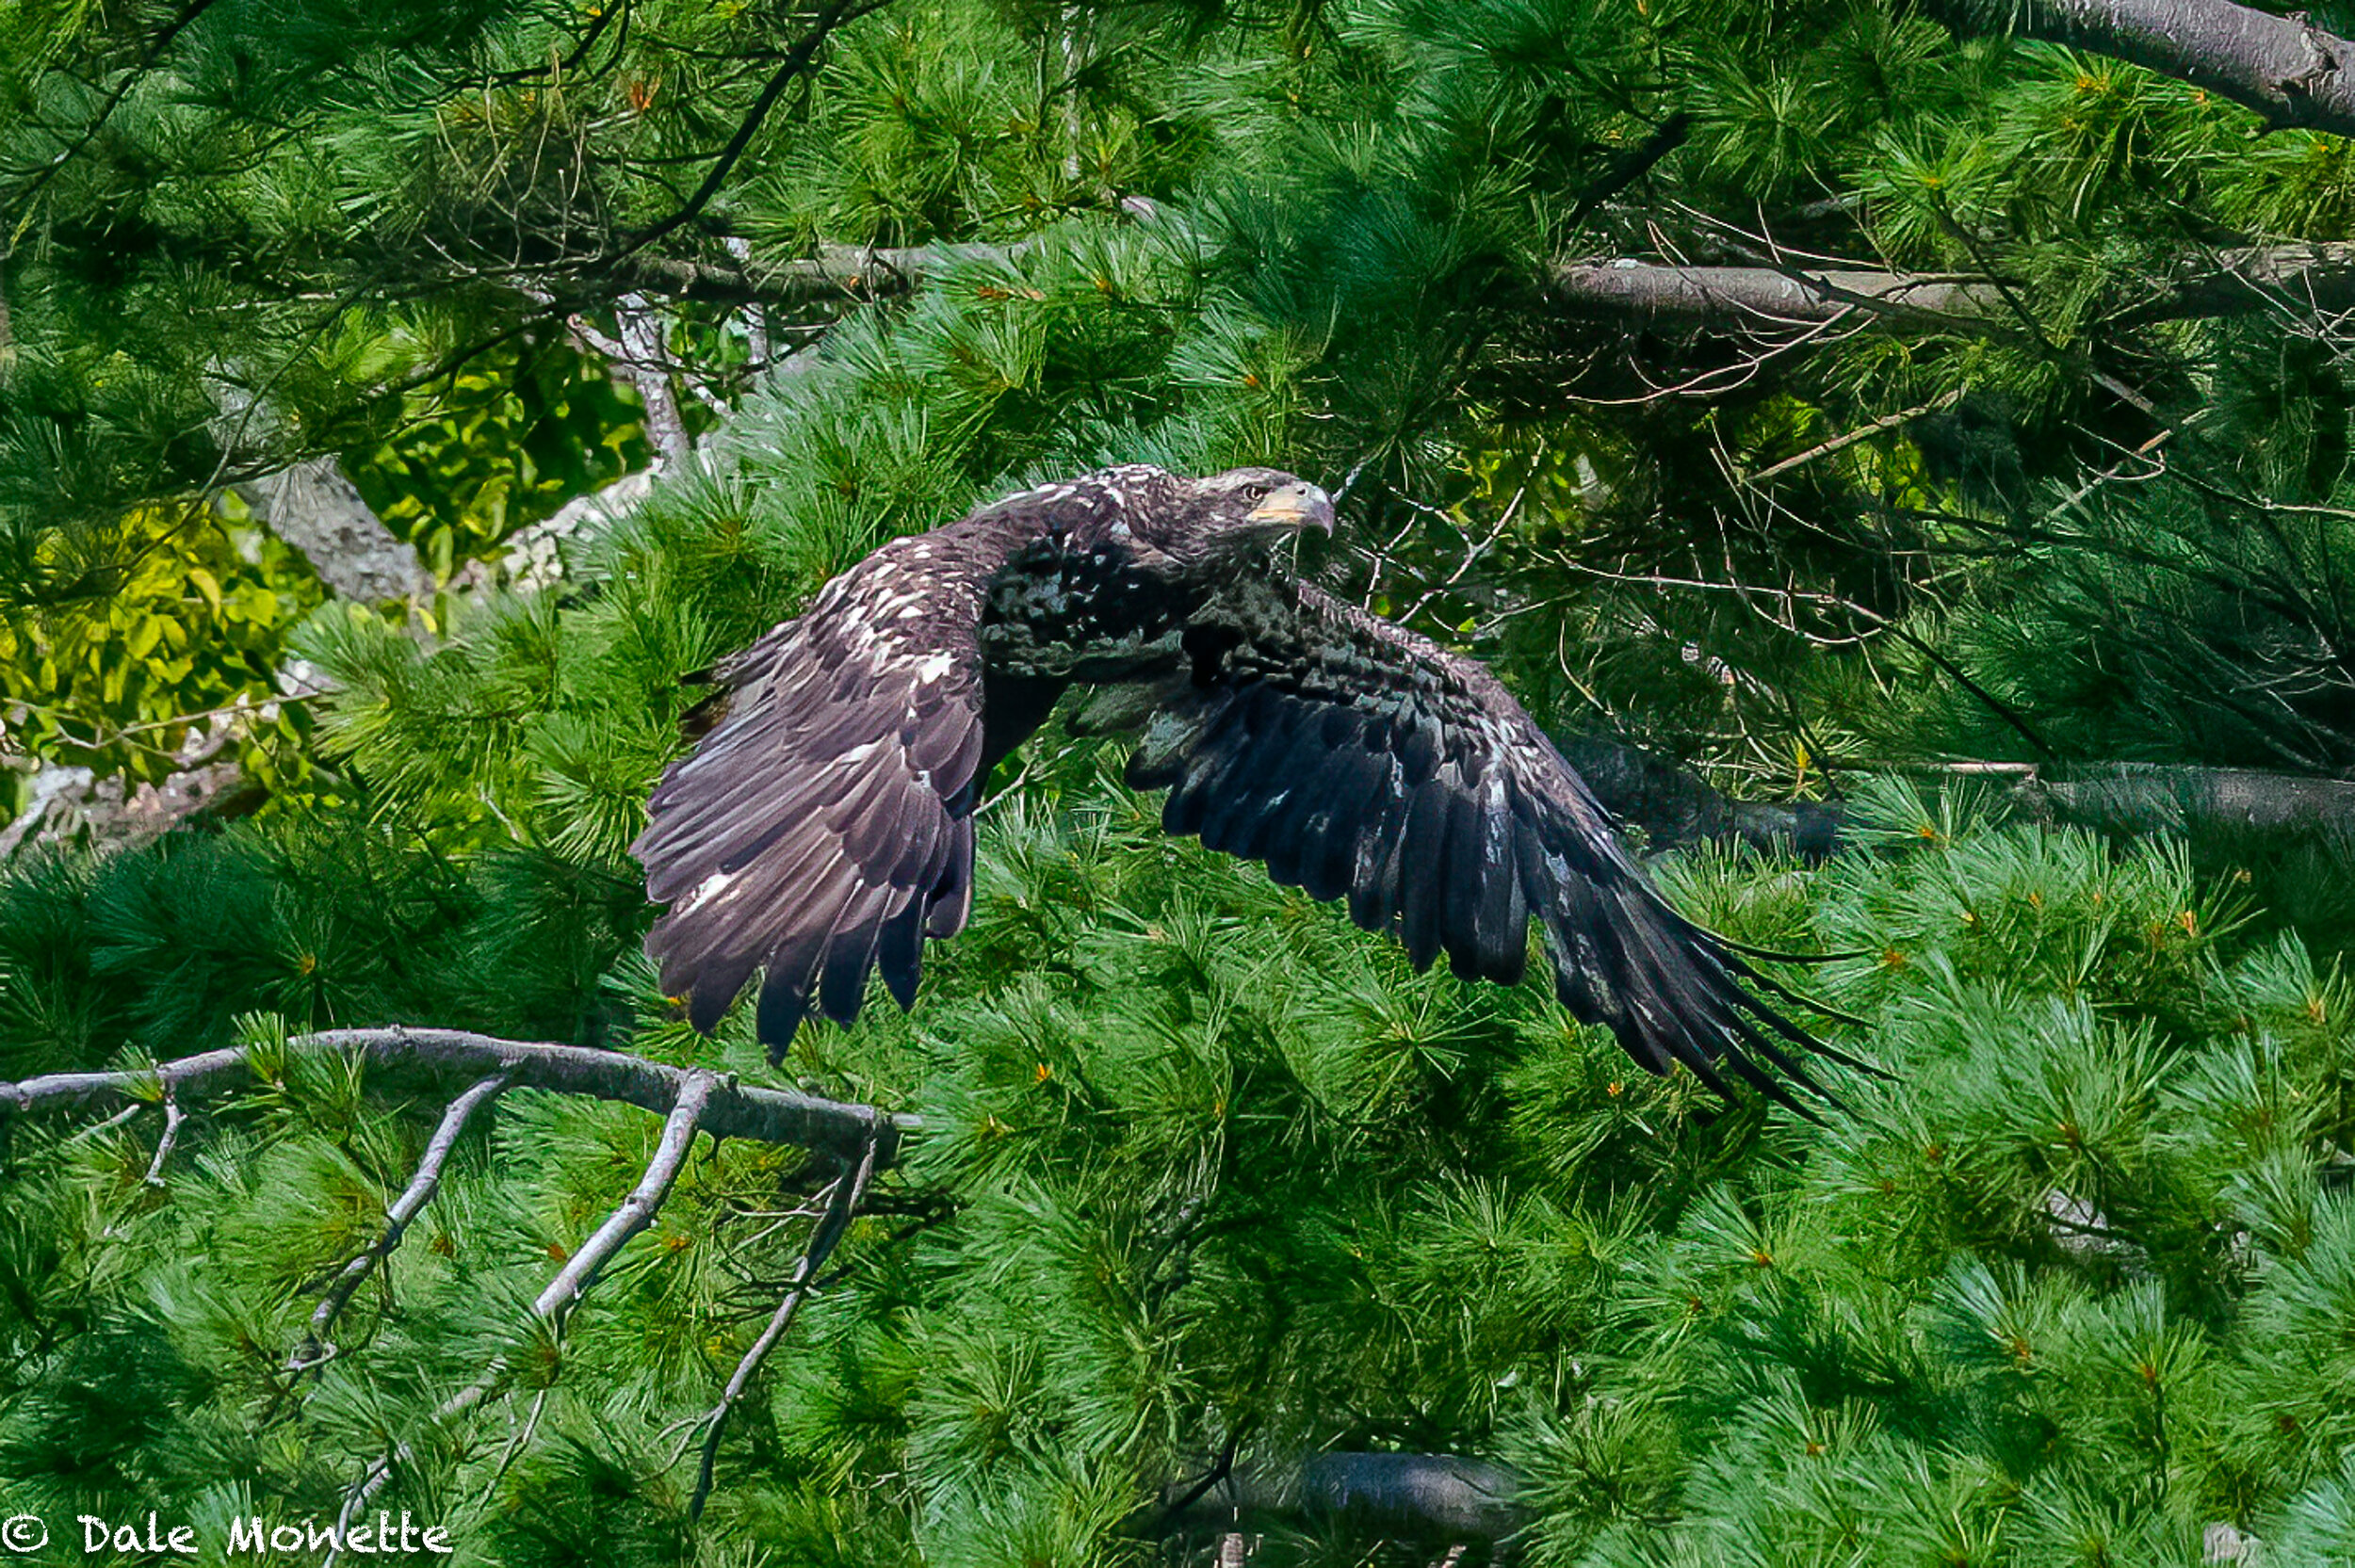   We cruised right by this immature bald eagle on Quabbbn Reservoir  during the weekly loon survey.  I knew he was going to jump out of the tree and I was ready for him to go.  